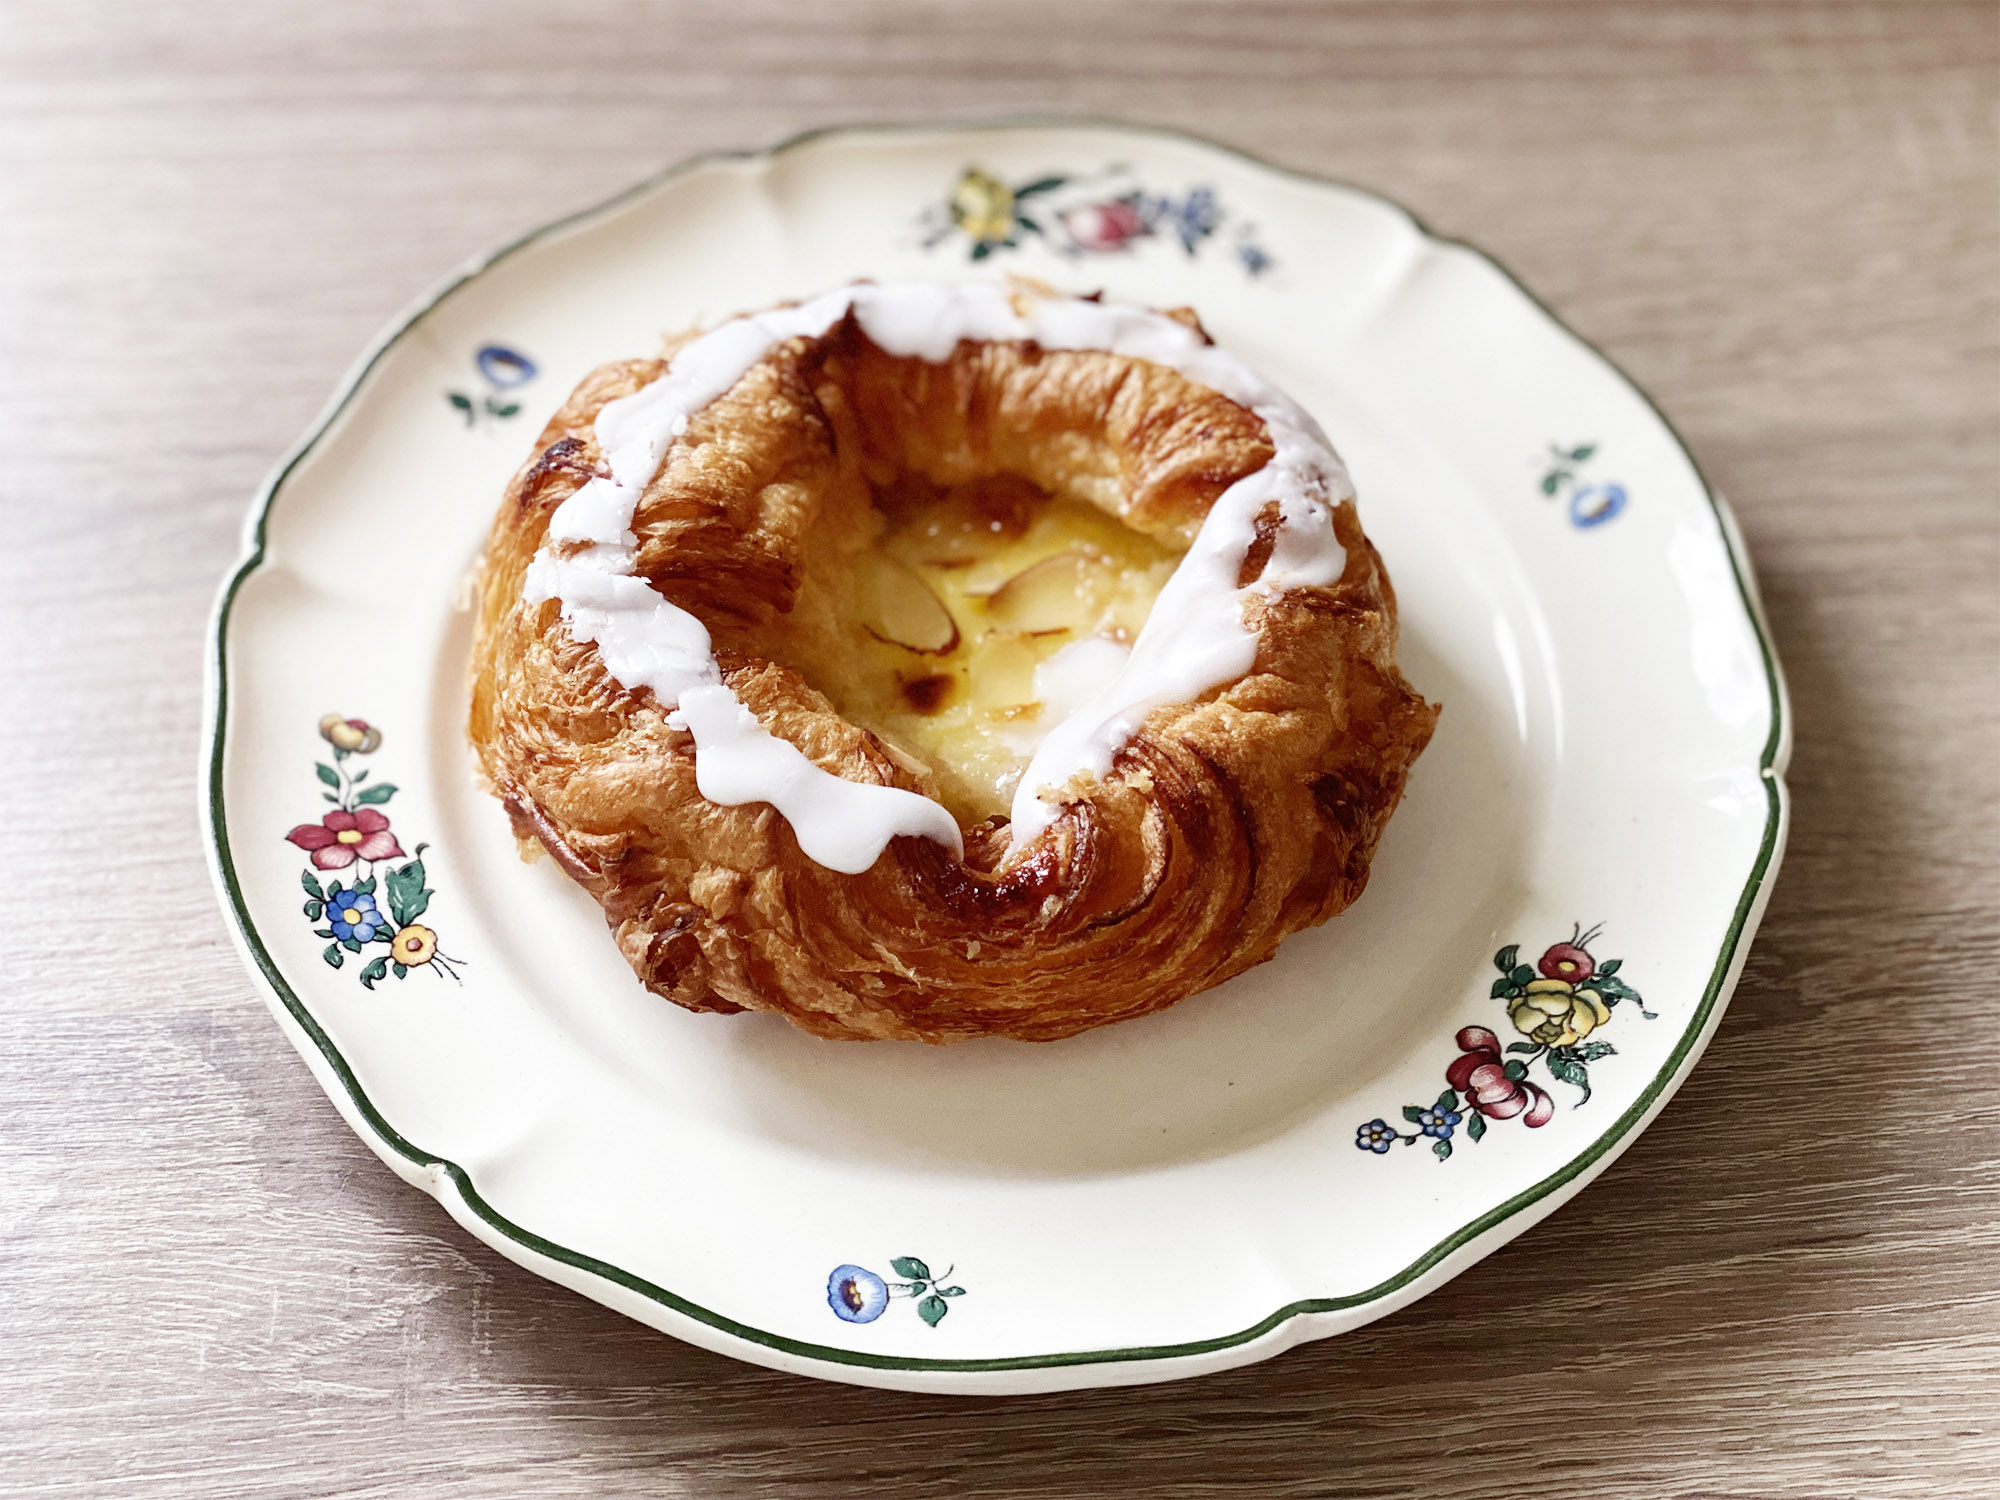 Wienerbrød: Traditional Danish Pastry - The ones you have to try